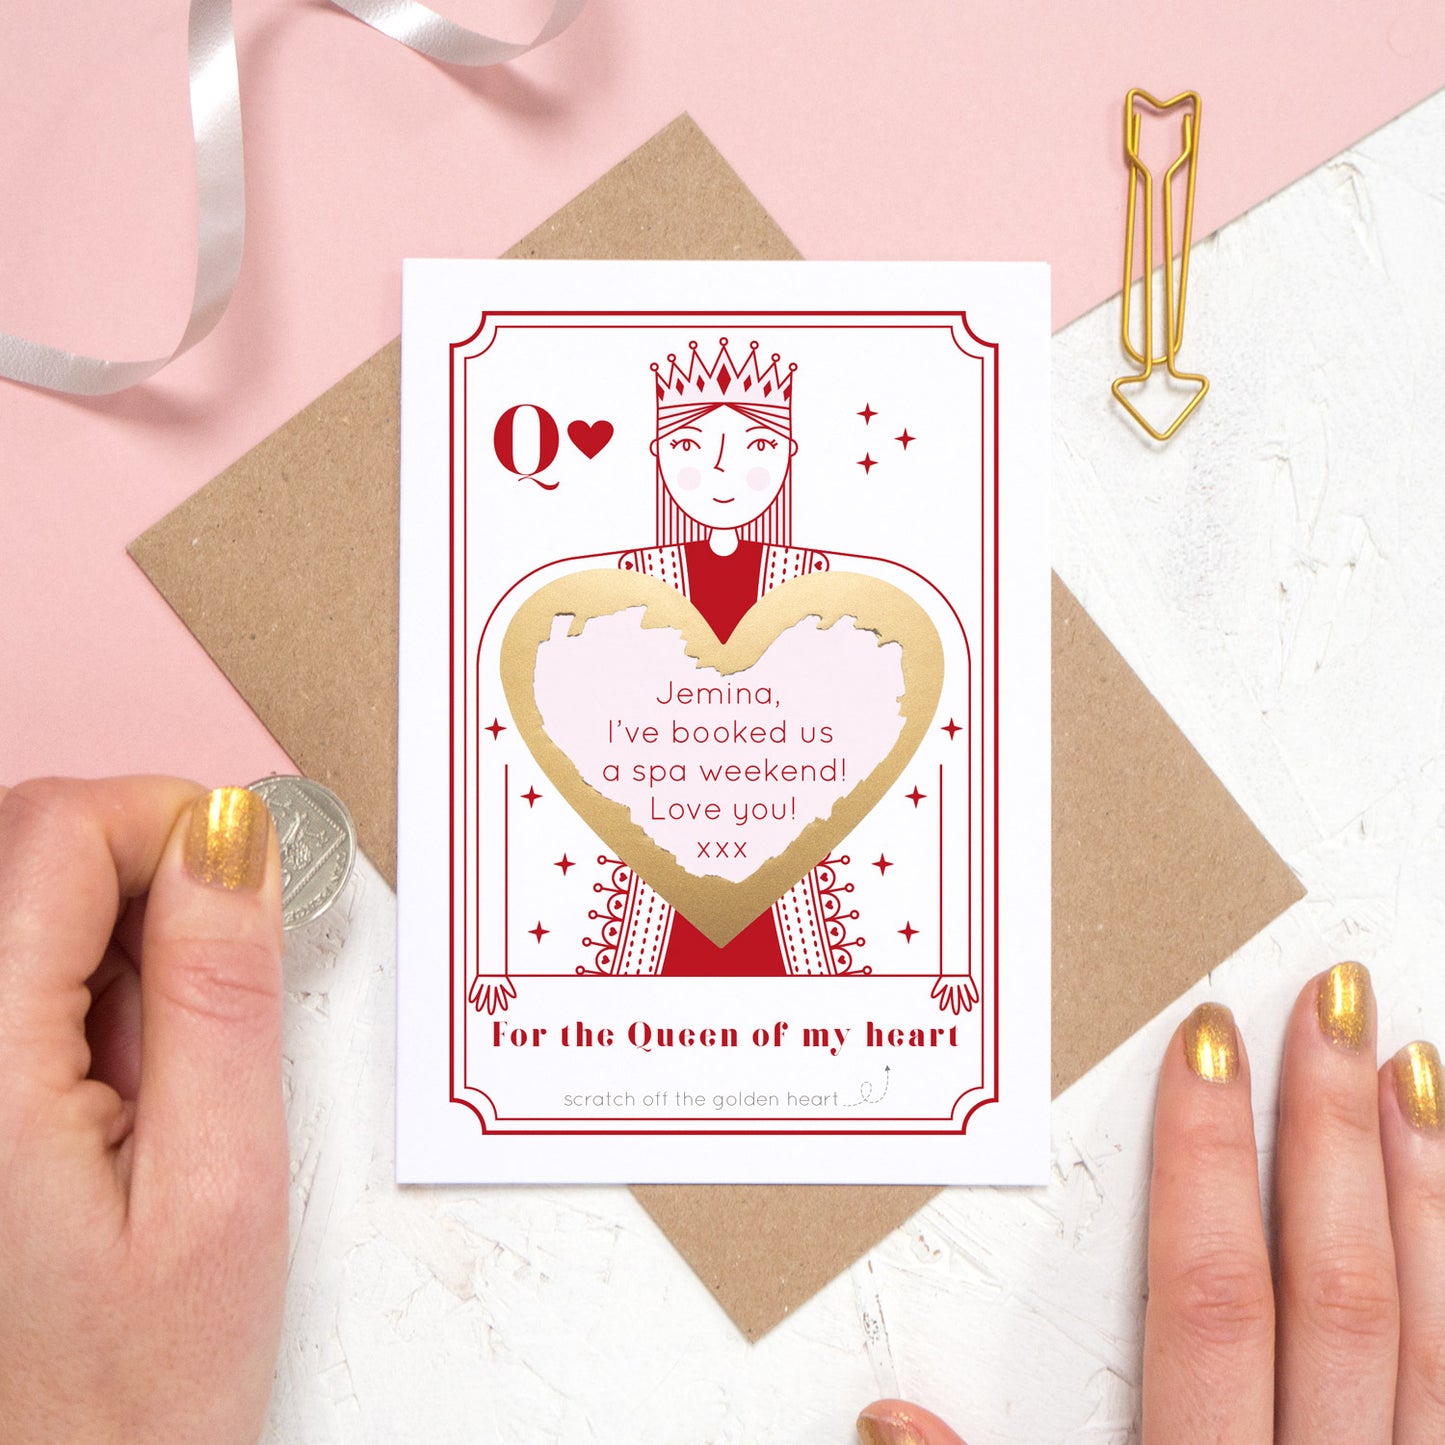 A queen of heart scratch card showing you where your printed personalisation will go on the card. The card has been scratched off.